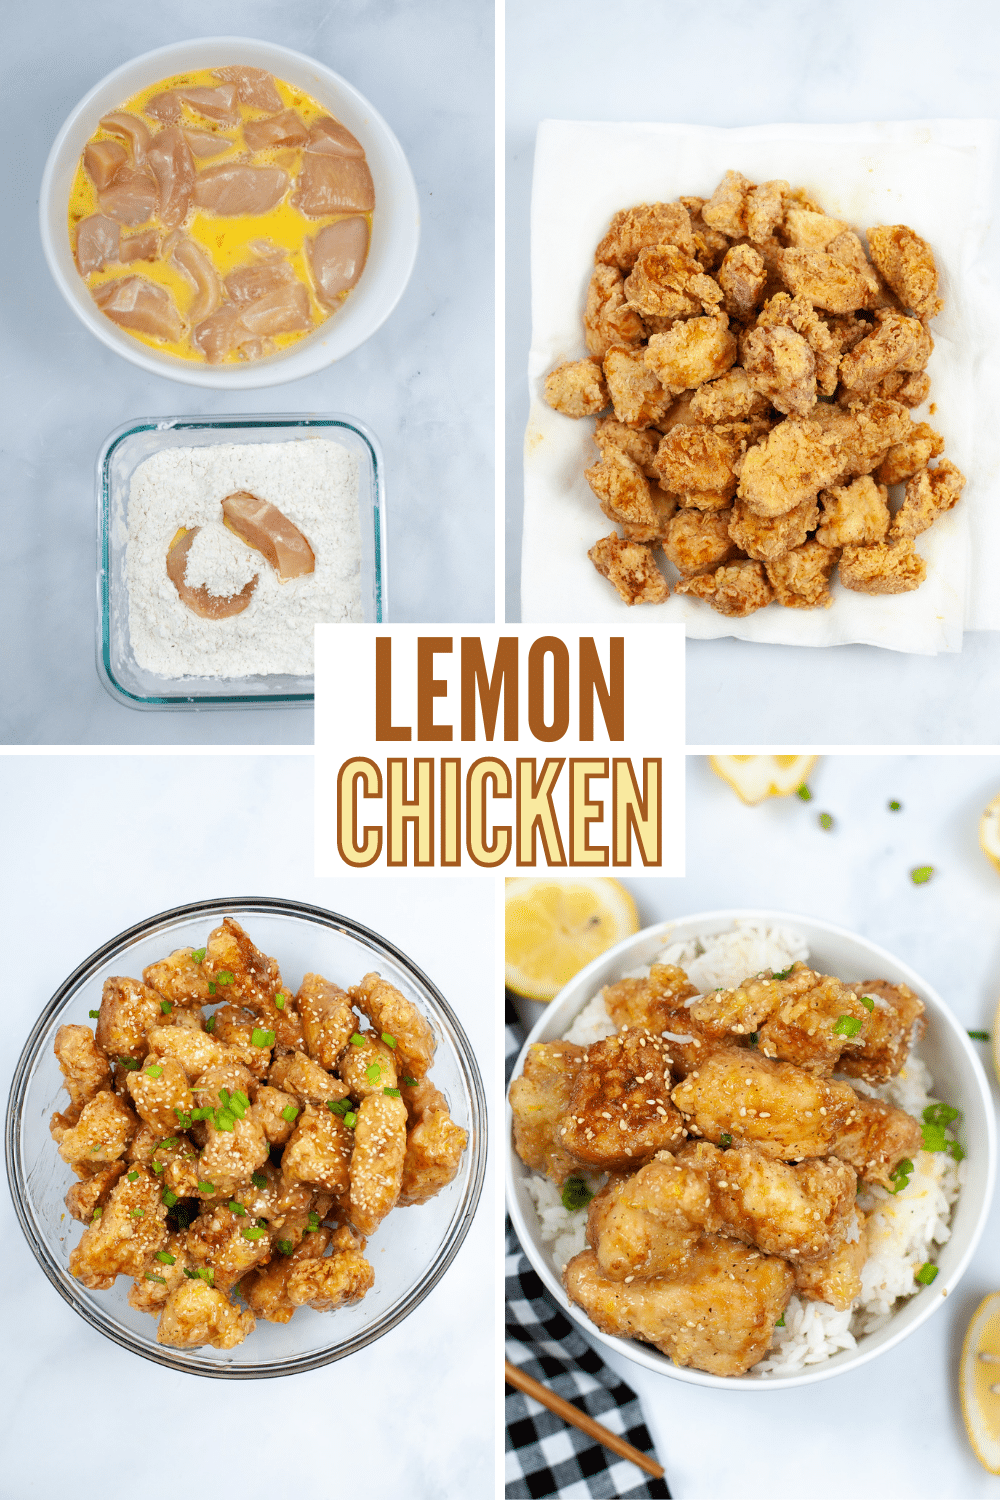 Lemon Chicken is so easy to make. This simple dish is coated in sweet and tangy citrus sauce, and can be on the table in 45 minutes. #lemonchicken #chinesefood #chicken #recipe via @wondermomwannab